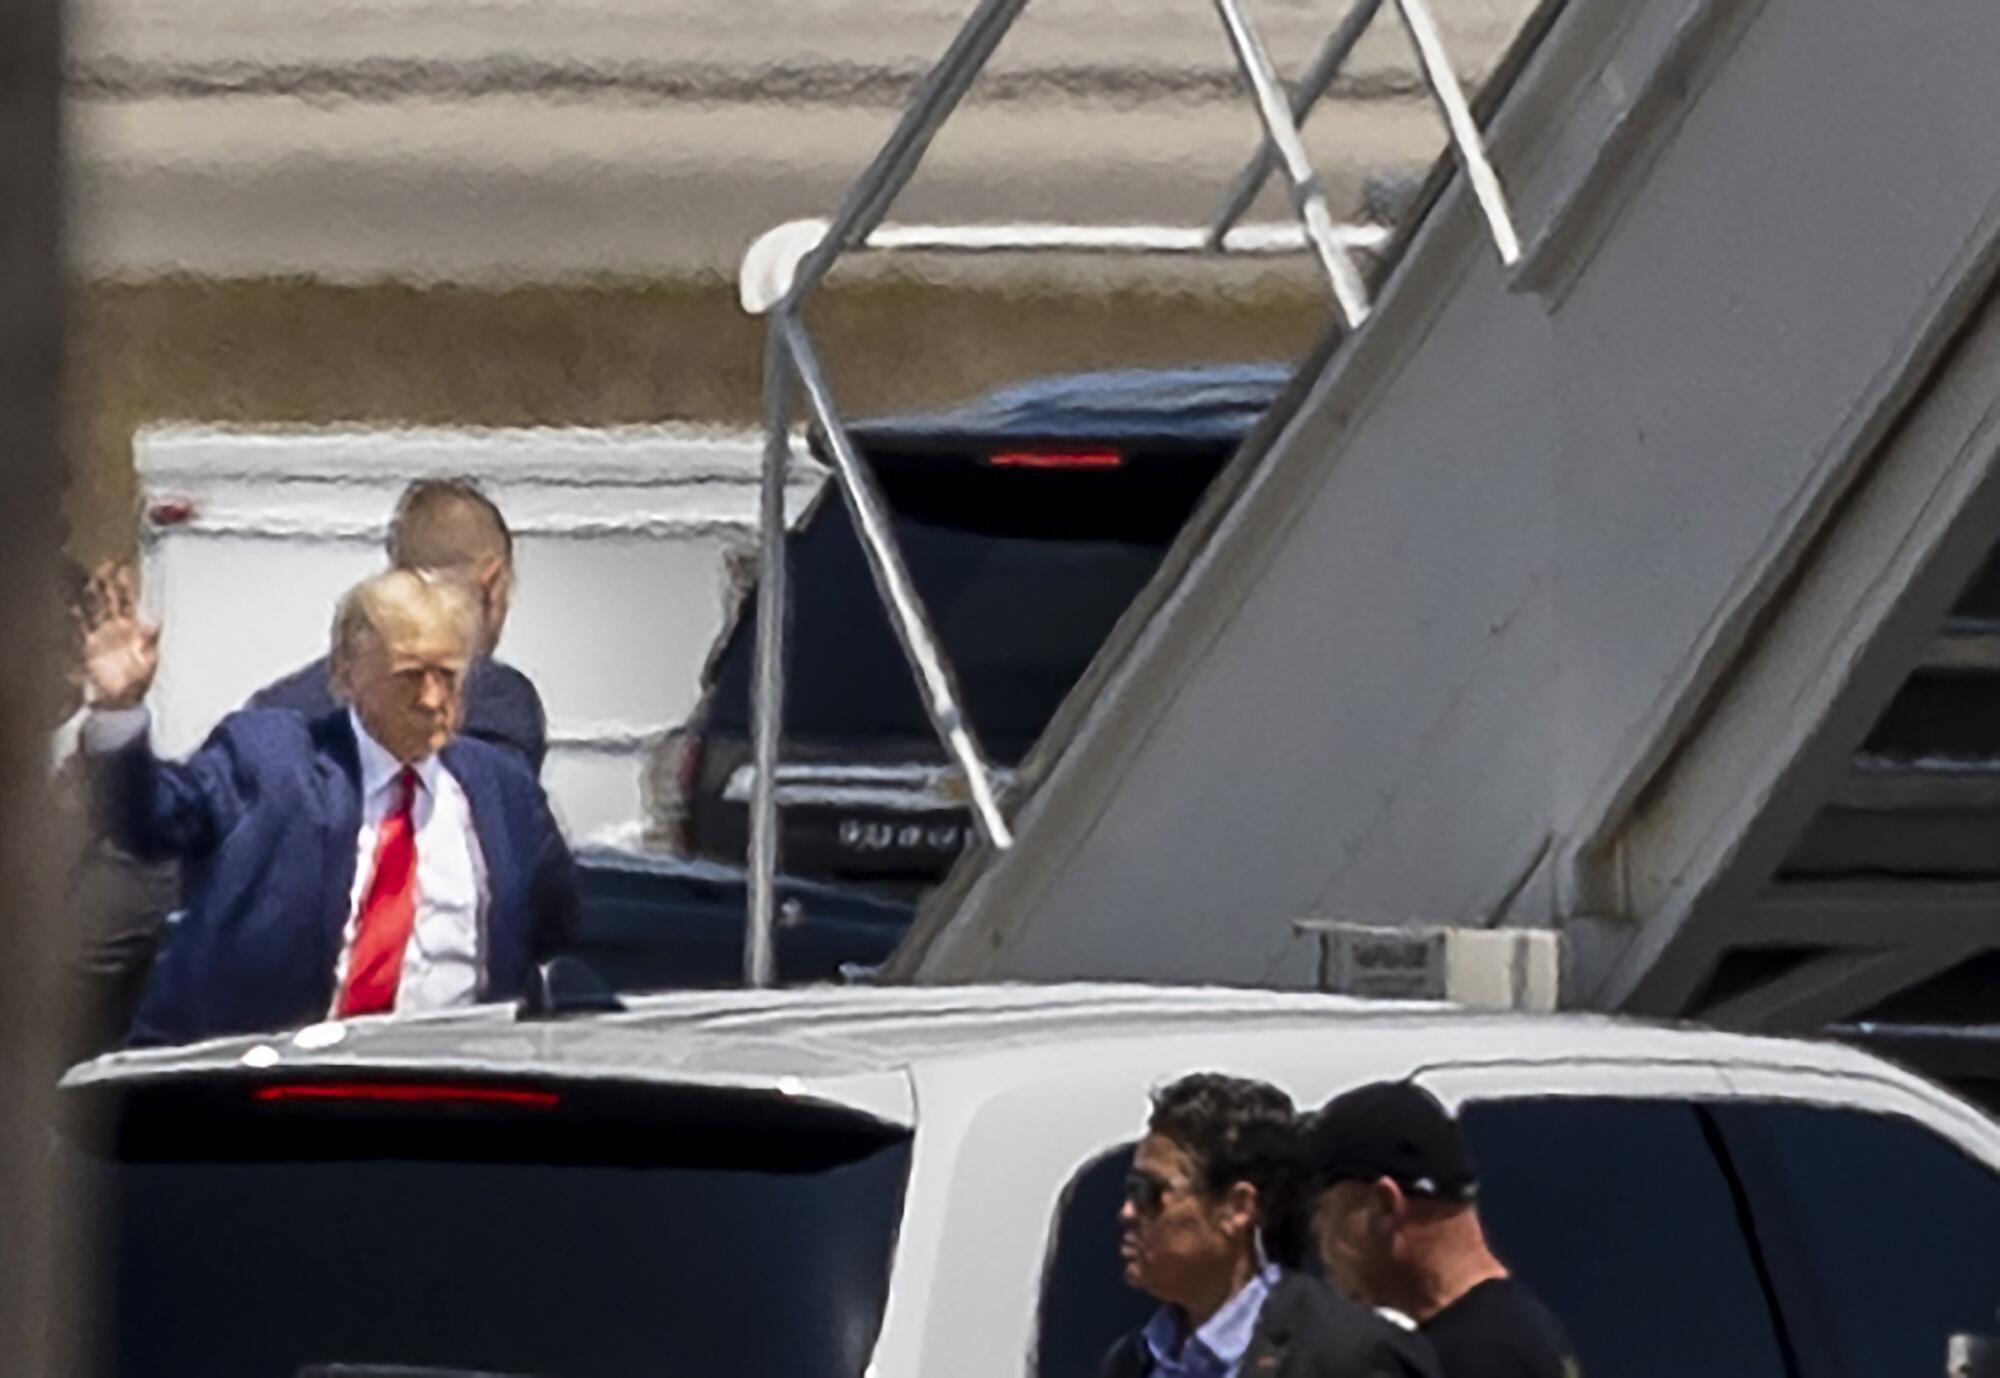 Donald Trump waves as he heads to the stairs to board his private plane.